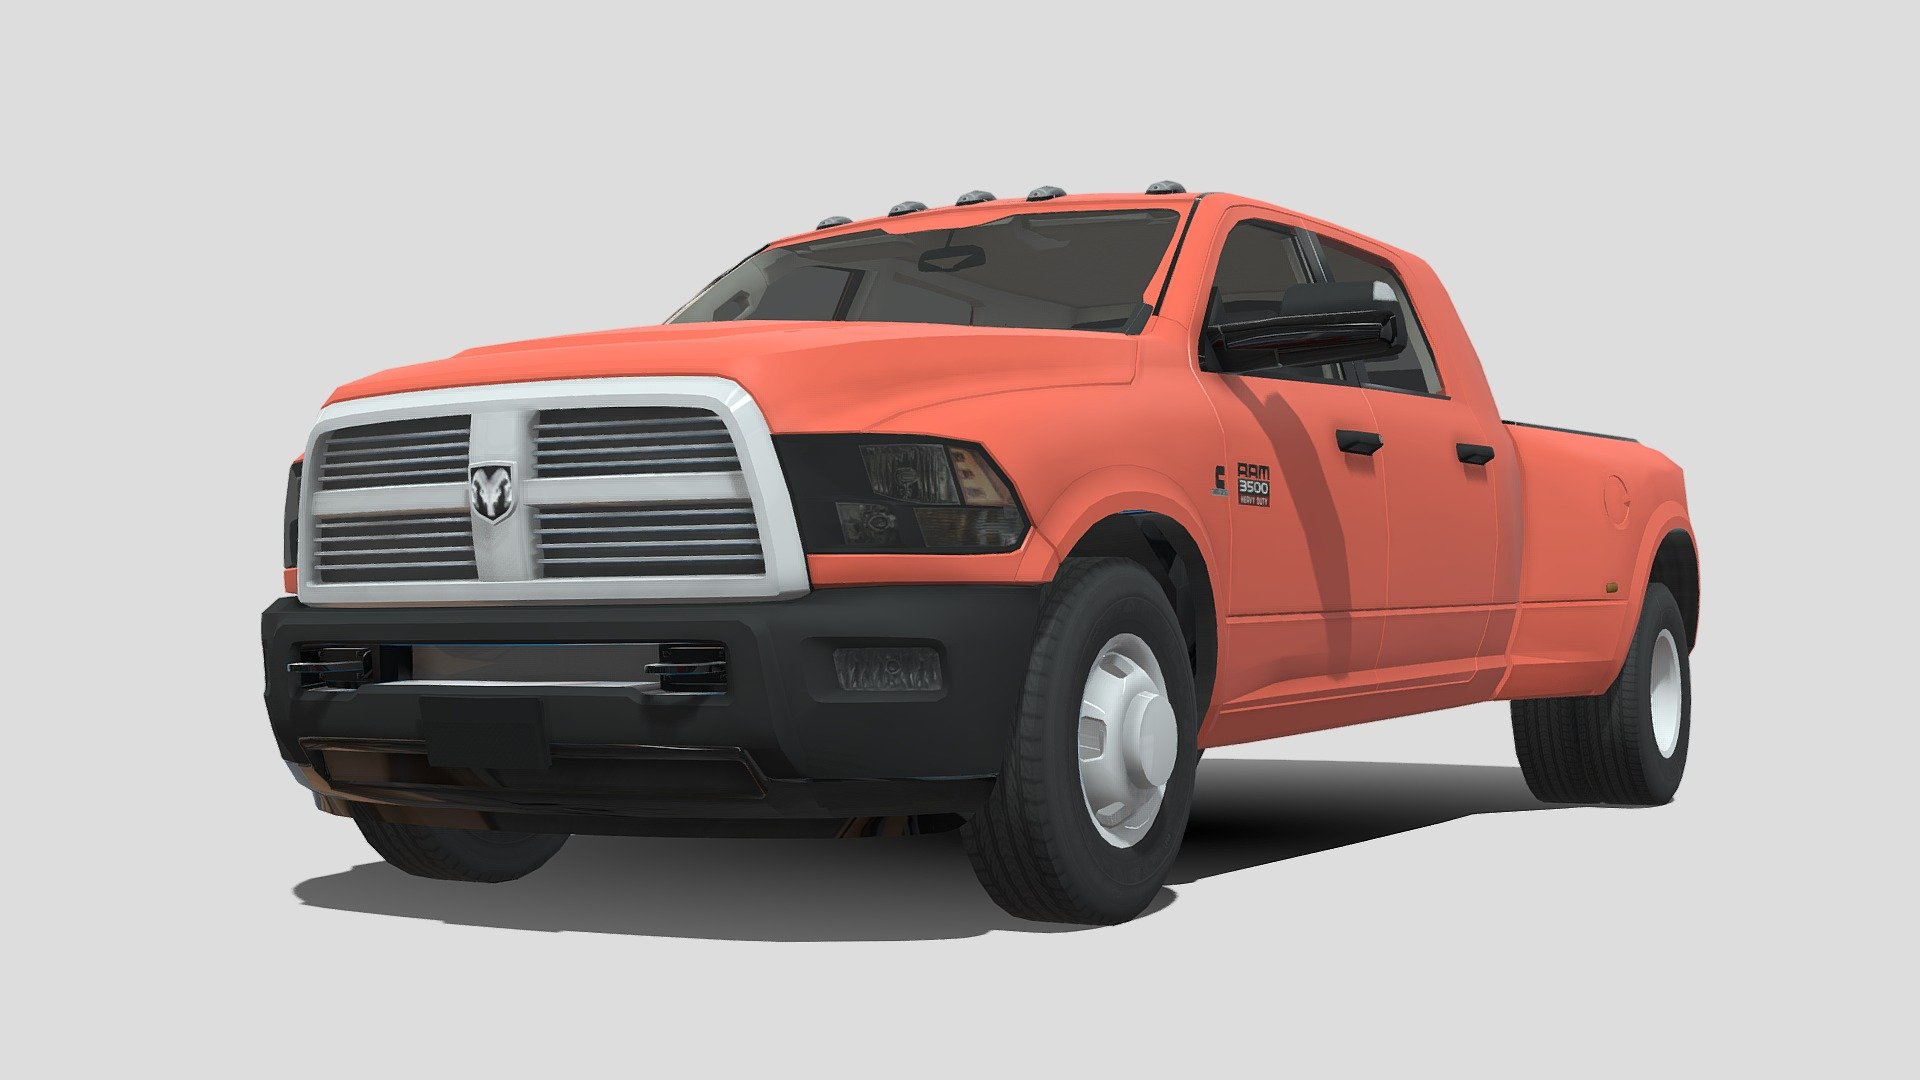 The Ram 3500 is available from $177,950 to $177,950 for the 2024 range of models in Dual Cab body types. Interested in a Ram 3500?

The 2024 Ram 3500 boasts standard 410 gas horsepower and a payload capacity of up to 7,680 pounds when equipped with the 6.4L HEMI® V8 engine or a diesel towing capacity of 37,090 pounds and 1,075 pound-feet of torque when equipped with the available High-Output 6.7L Cummins® Turbo Diesel I6 engine.

When properly equipped, the Ram 3500 can tow up to 35,100 pounds. It continues to offer the excellent Uconnect infotainment system, with an optional 12-inch fully configurable screen. The heavy-duty Ram 3500 promises industry-leading hauling and towing capabilities. It competes with the other Detroit monster trucks 3d model